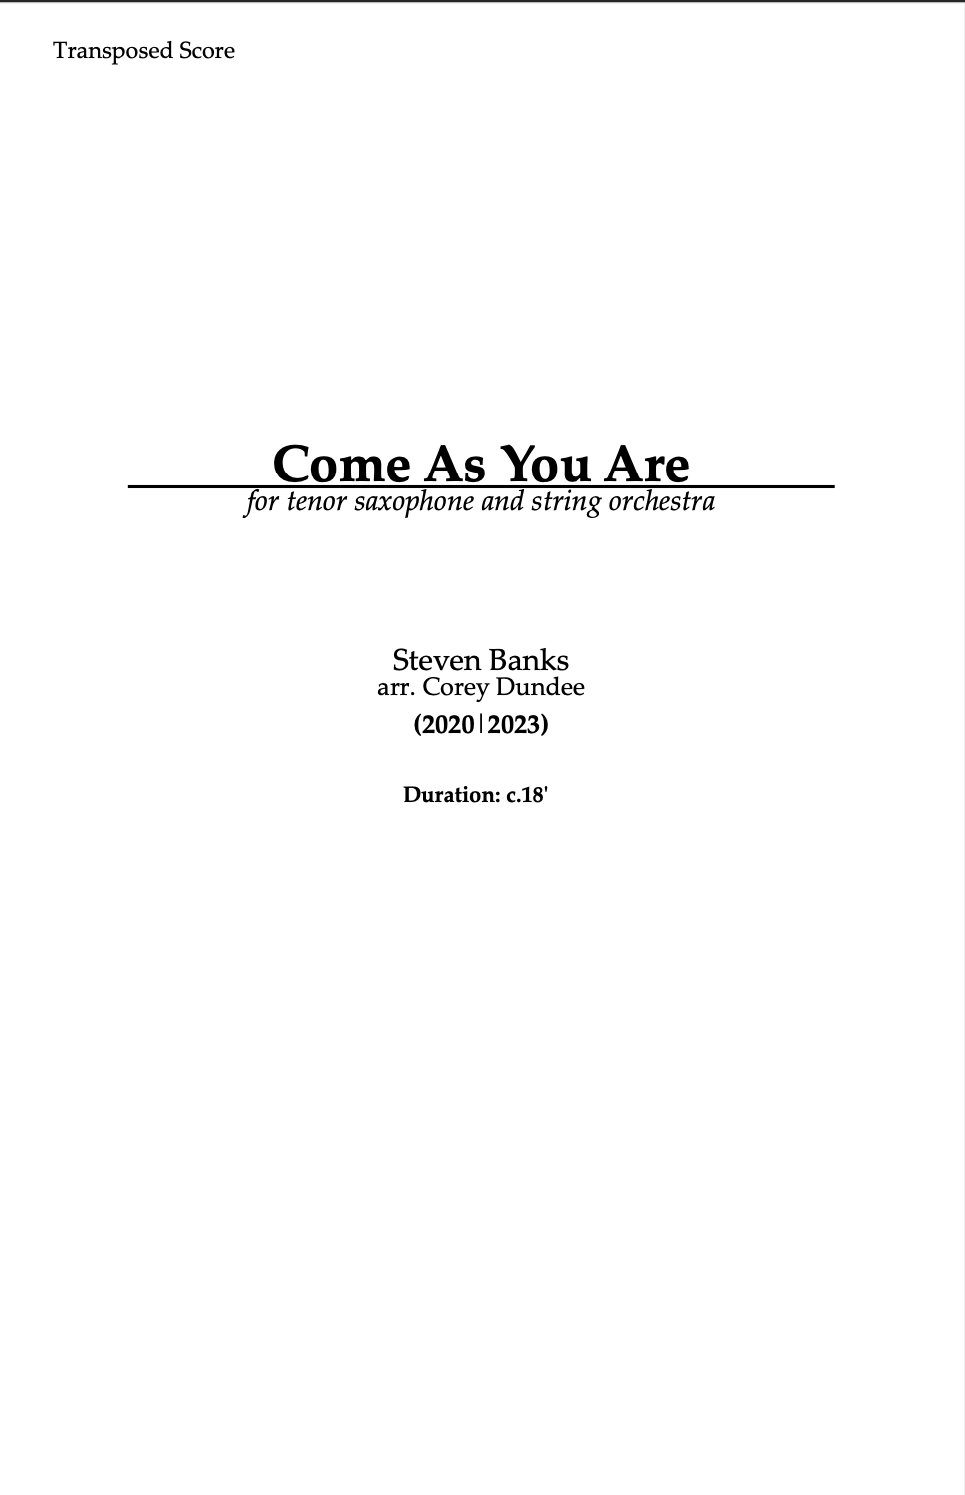 Come As You Are (String Orchestra Version) (Parts Rental Only) by Steven Banks arr. Corey Dundee